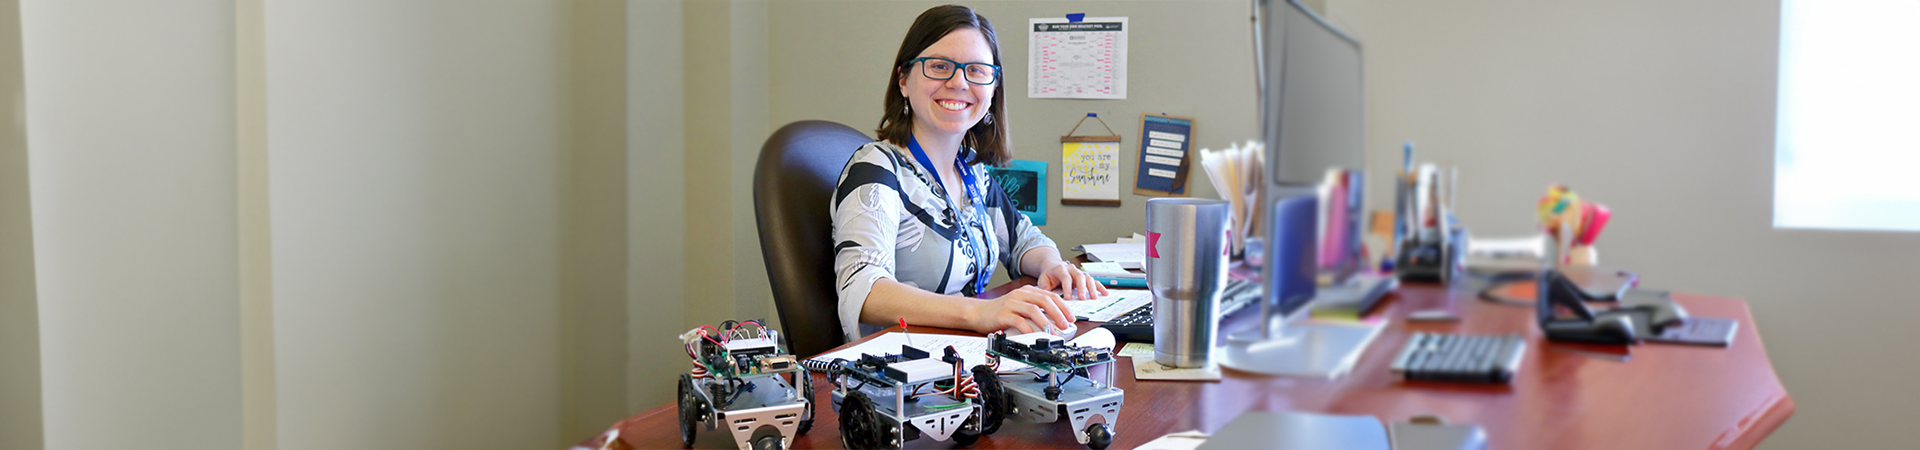  Callie Dean at her desk with some robots 